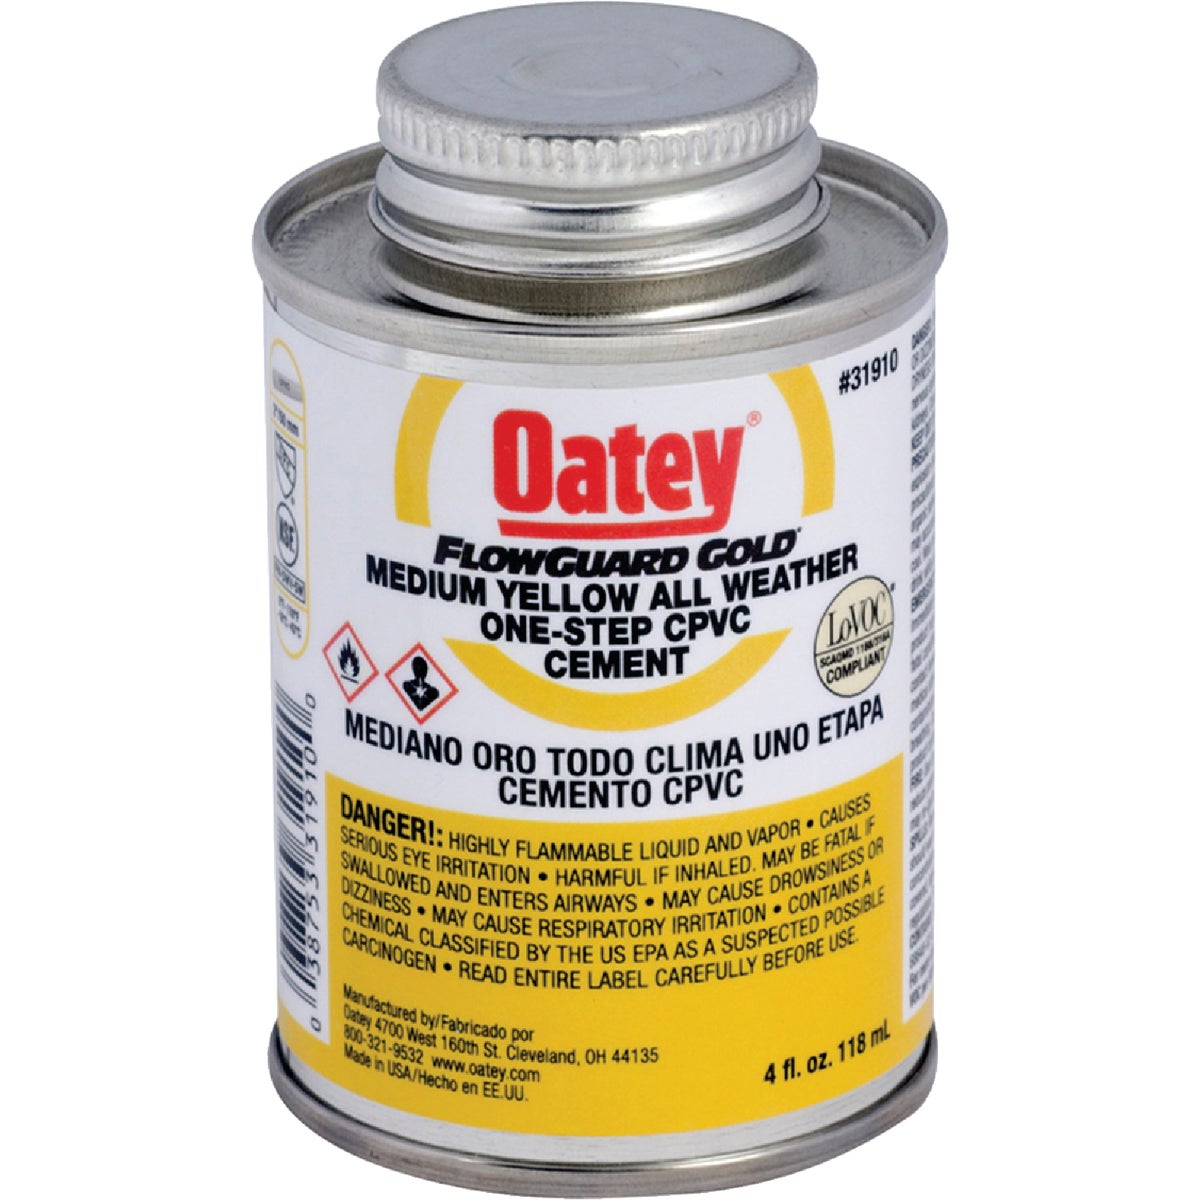 Oatey FlowGuard Gold 4 Oz. Medium Bodied Yellow All Weather One-Step CPVC Cement